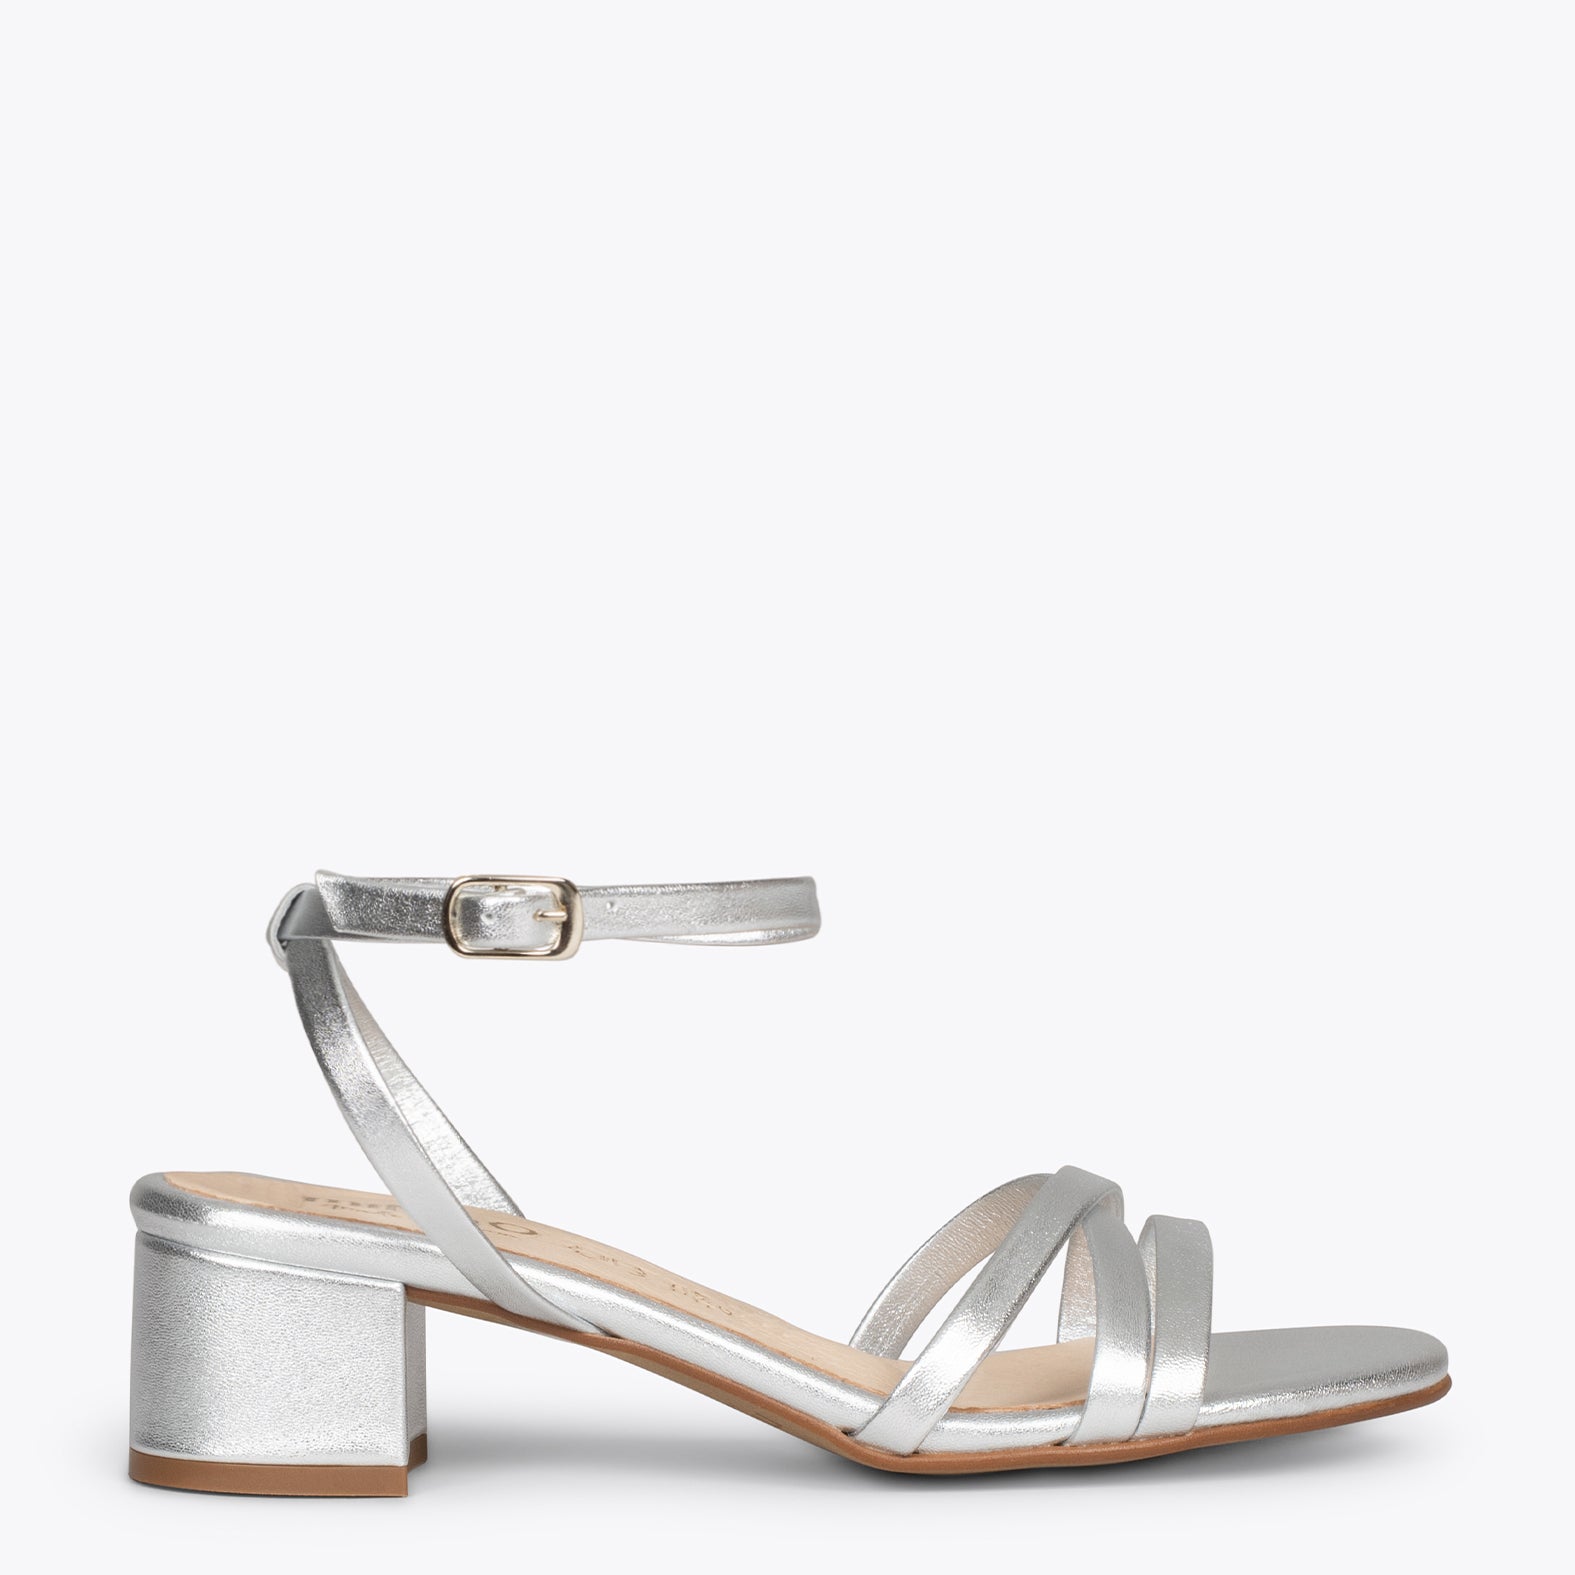 VIENA – SILVER sandals with straps